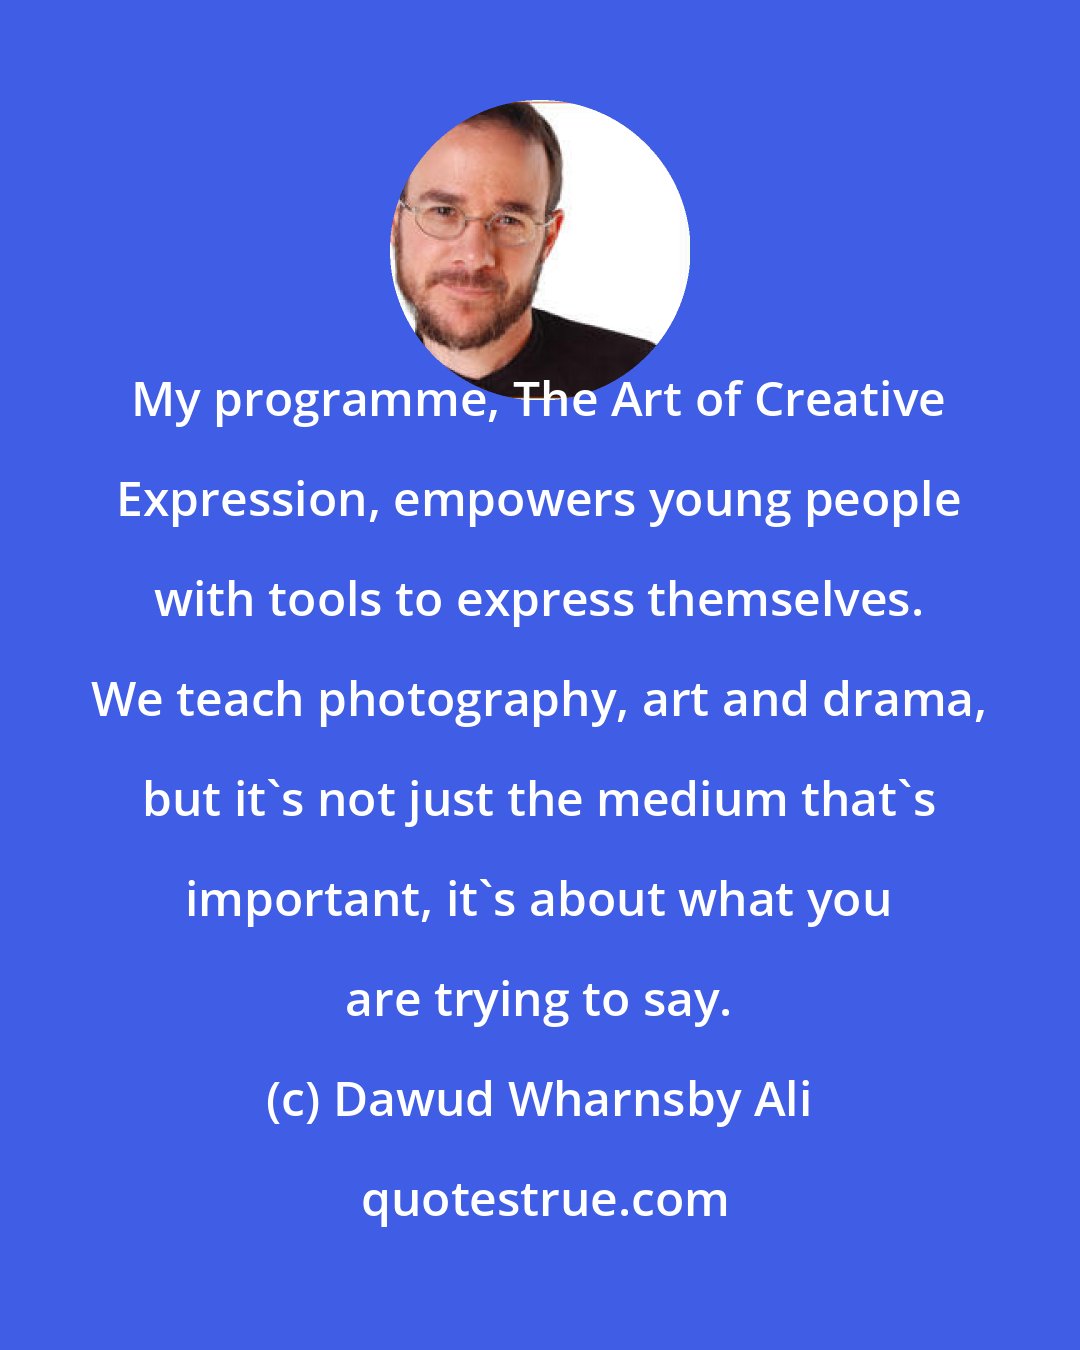 Dawud Wharnsby Ali: My programme, The Art of Creative Expression, empowers young people with tools to express themselves. We teach photography, art and drama, but it's not just the medium that's important, it's about what you are trying to say.